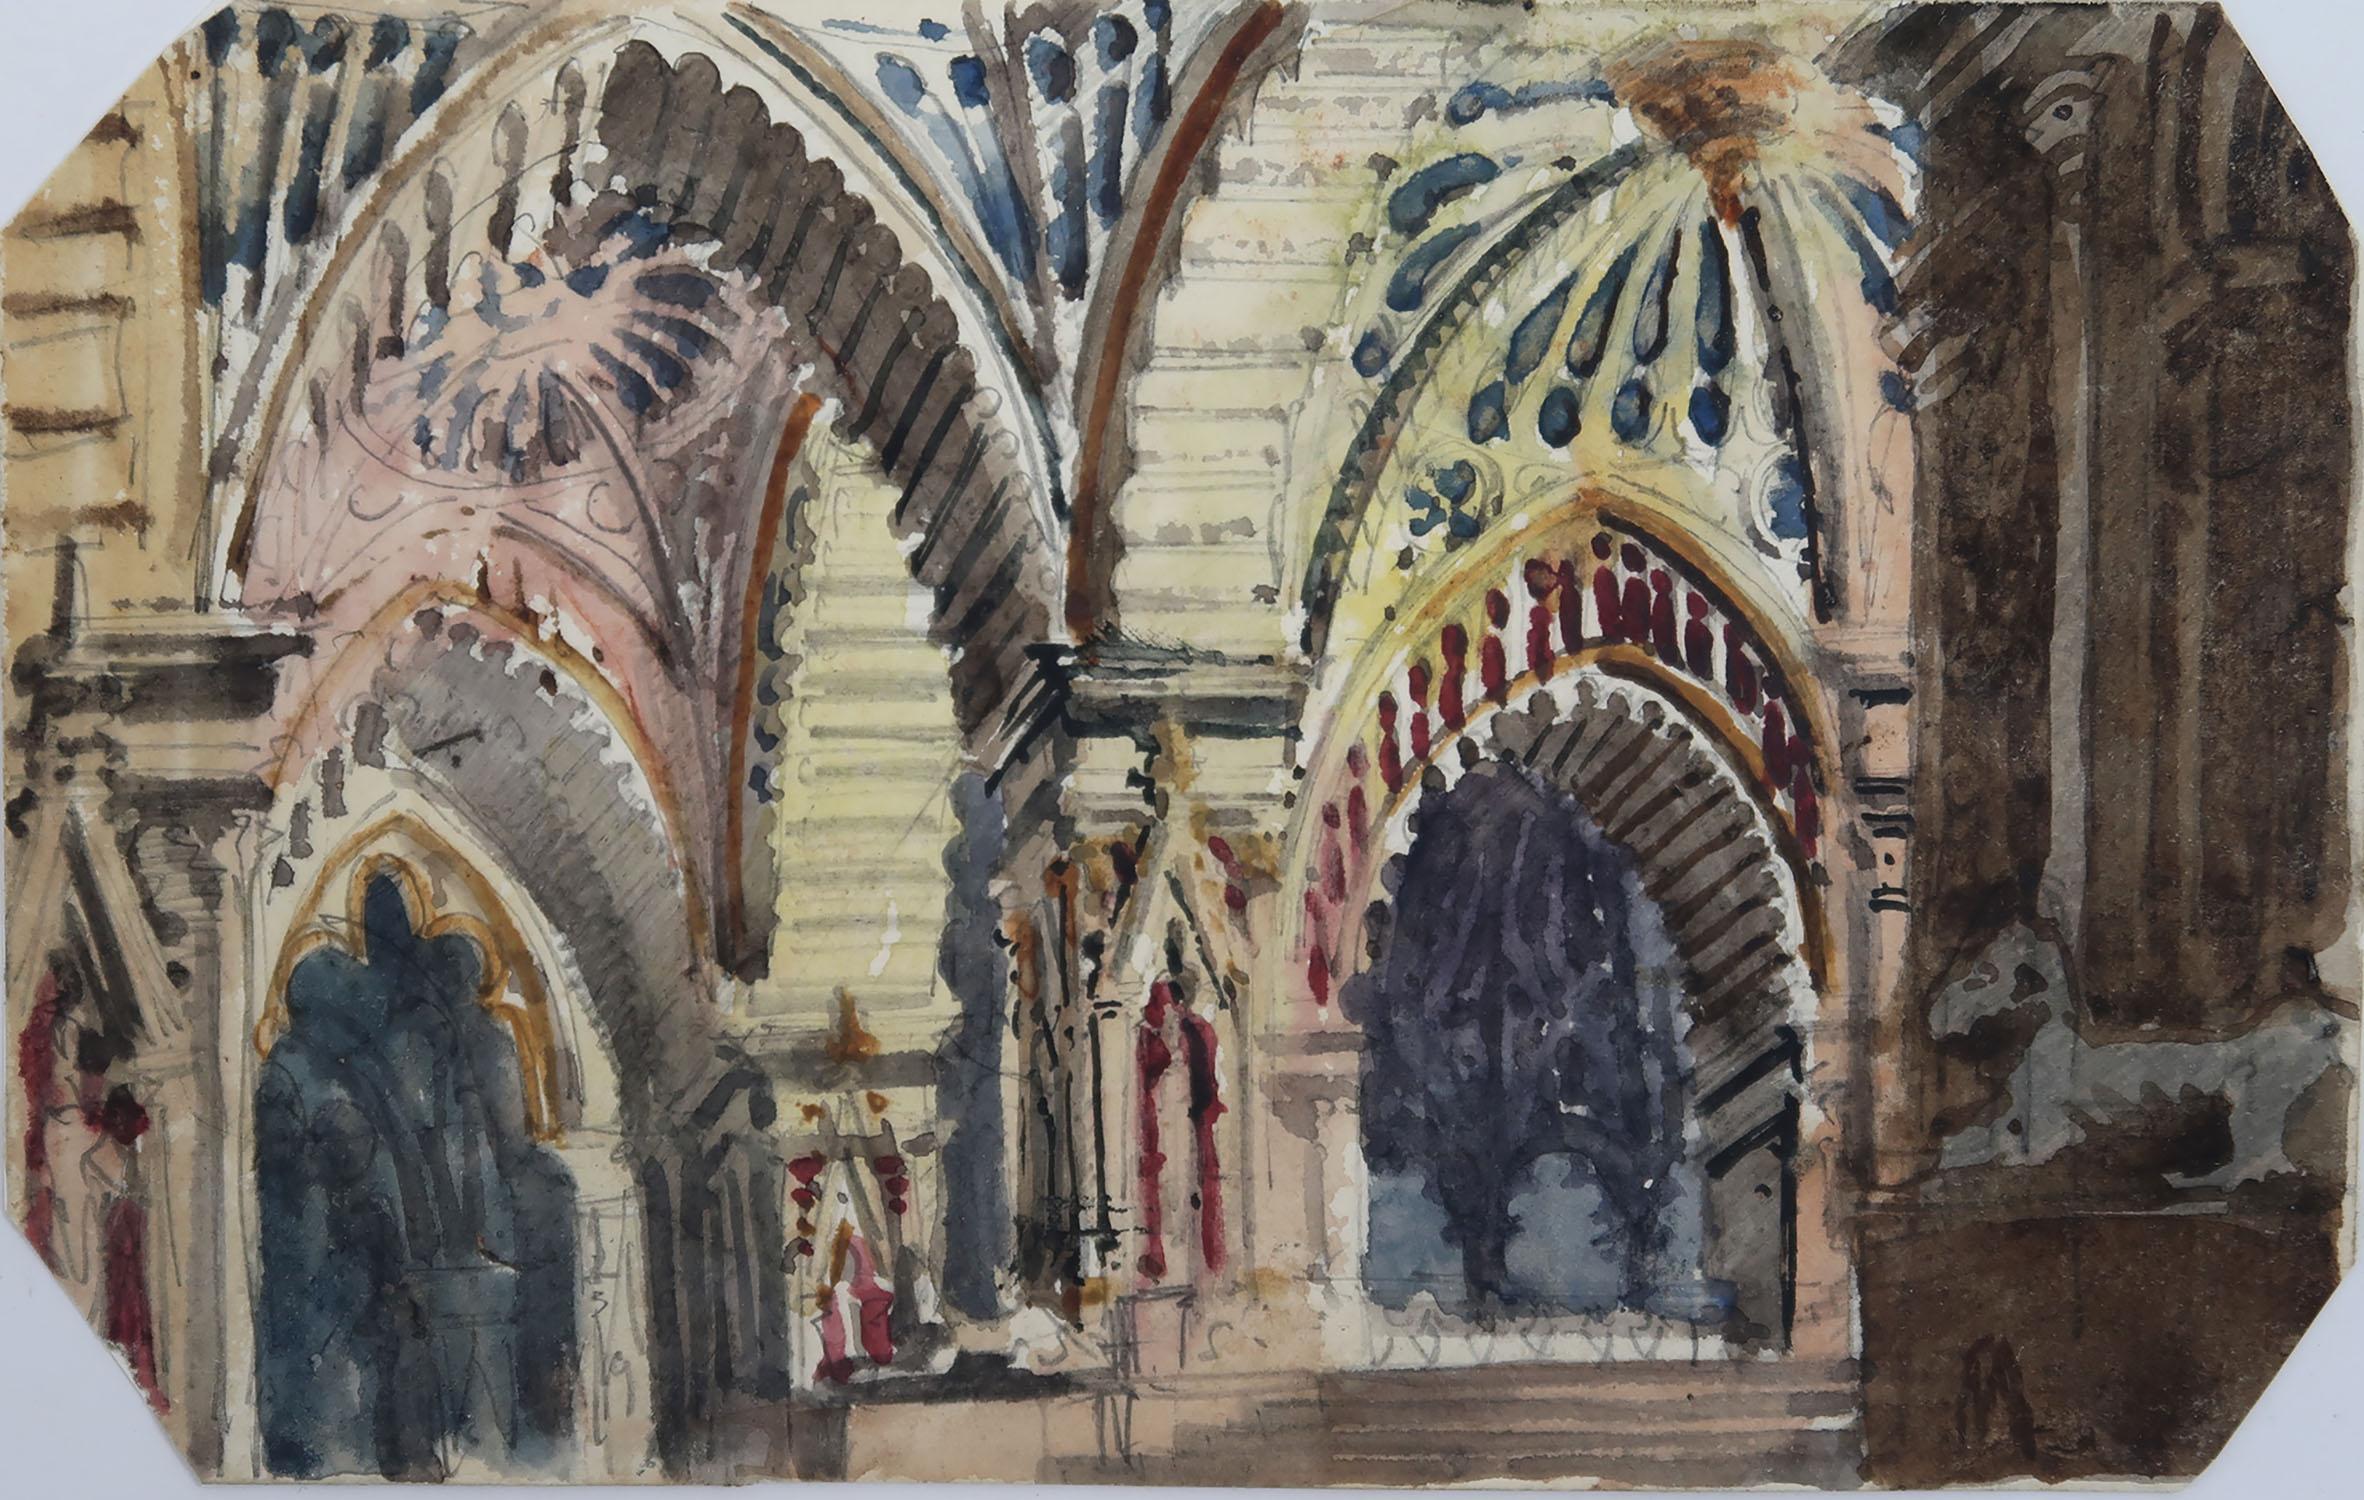 A beautiful watercolor of a church interior.

Trimmed corners

Inscribed Malta on the page of the album it came from

Fabulous quality. Lovely bright colours. Not faded at all.

By Edwin Landseer Grundy*. Provenance- From an album of